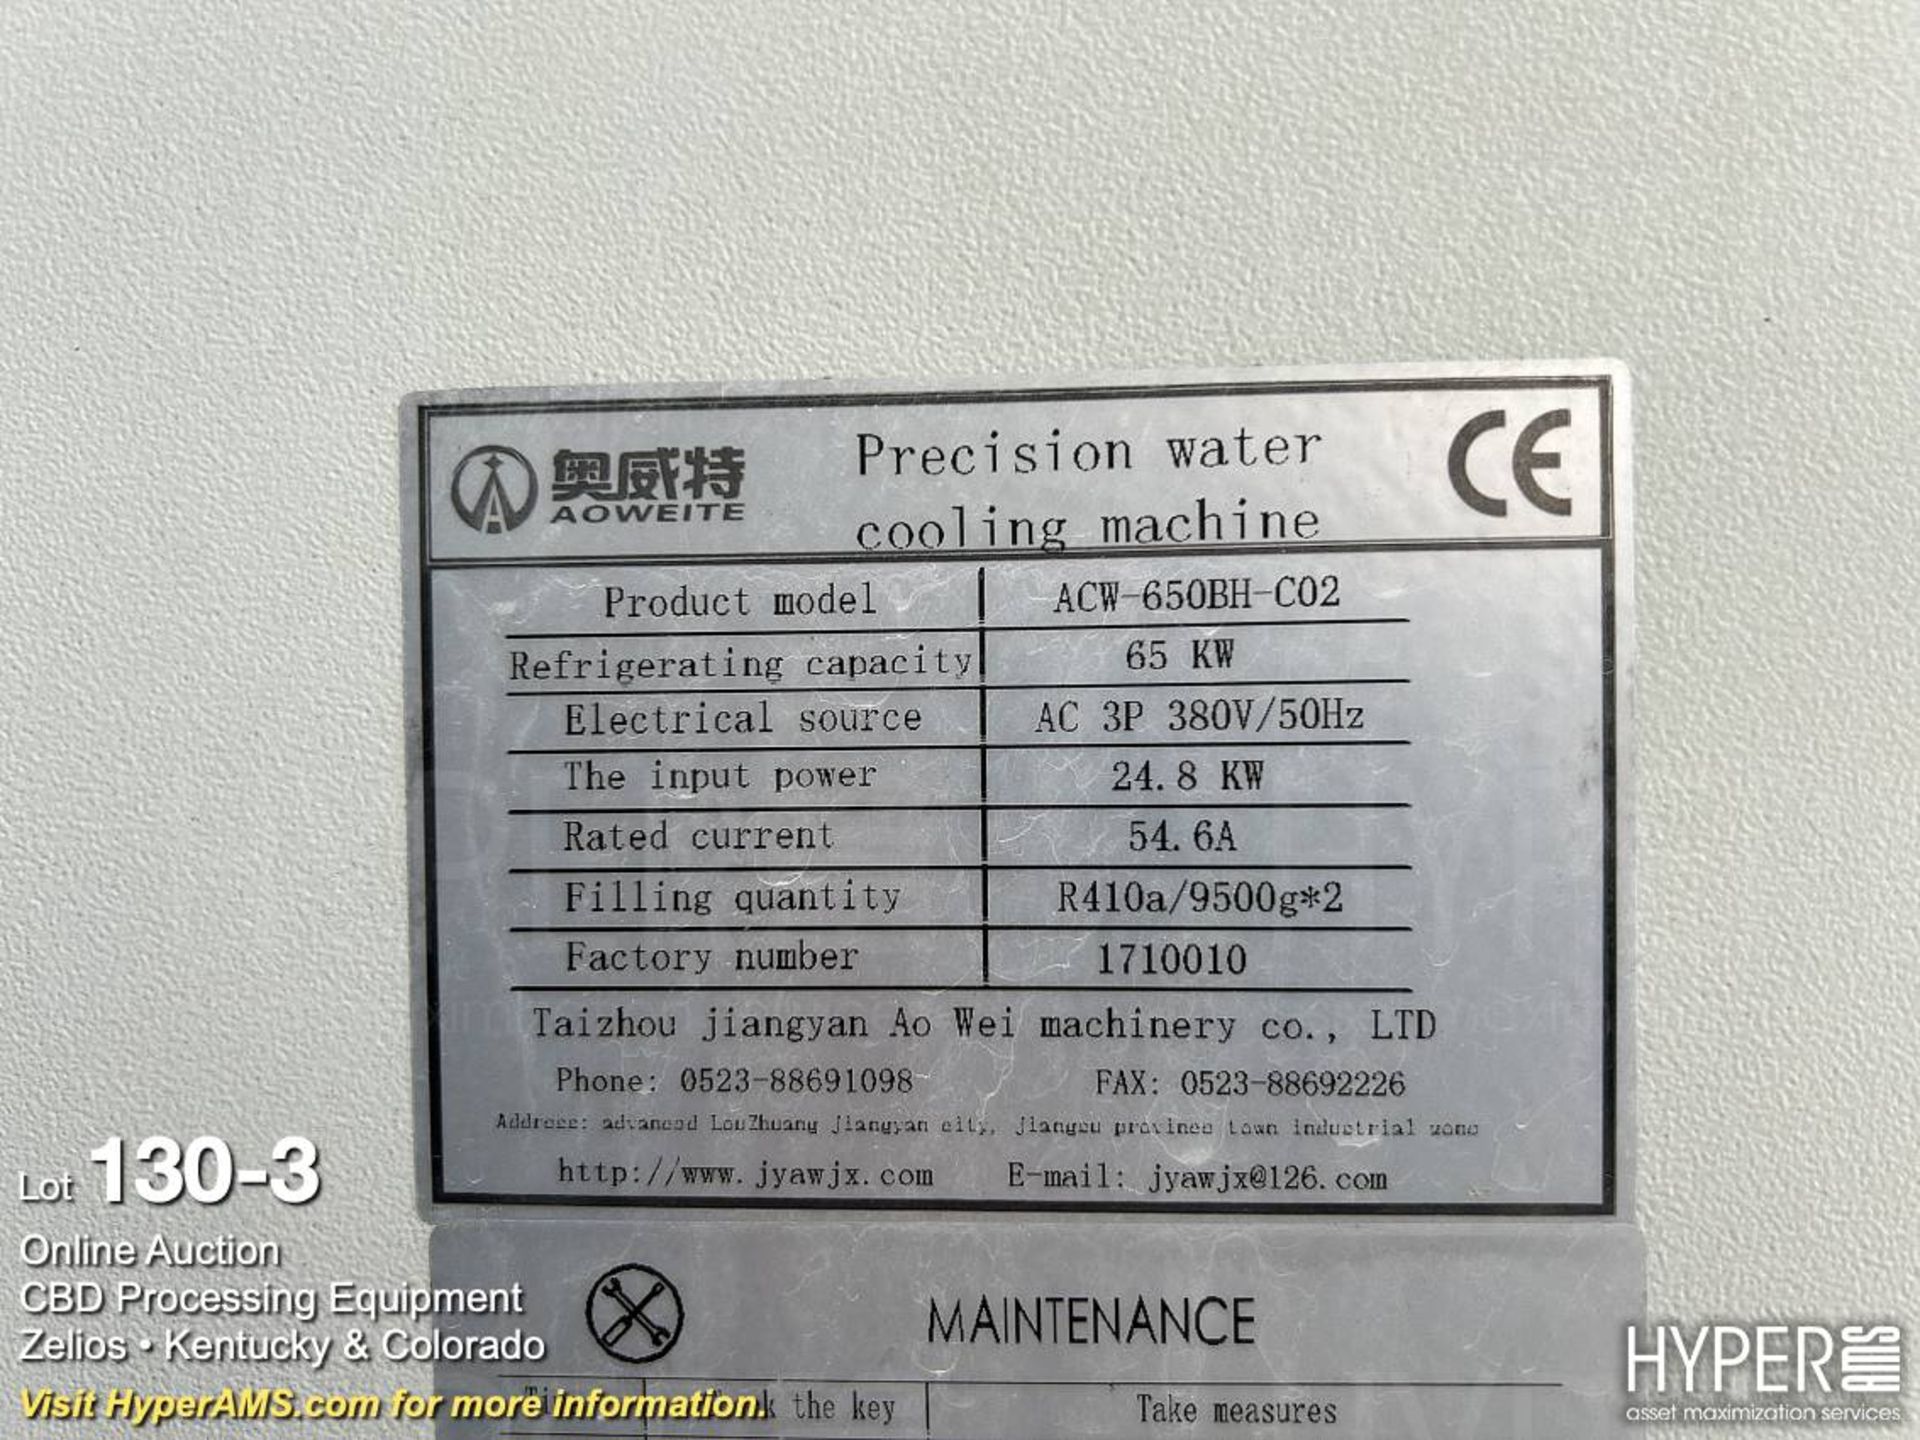 Aoweite Model ACW-650BH-C02 Precision Water Coolin - Image 3 of 7